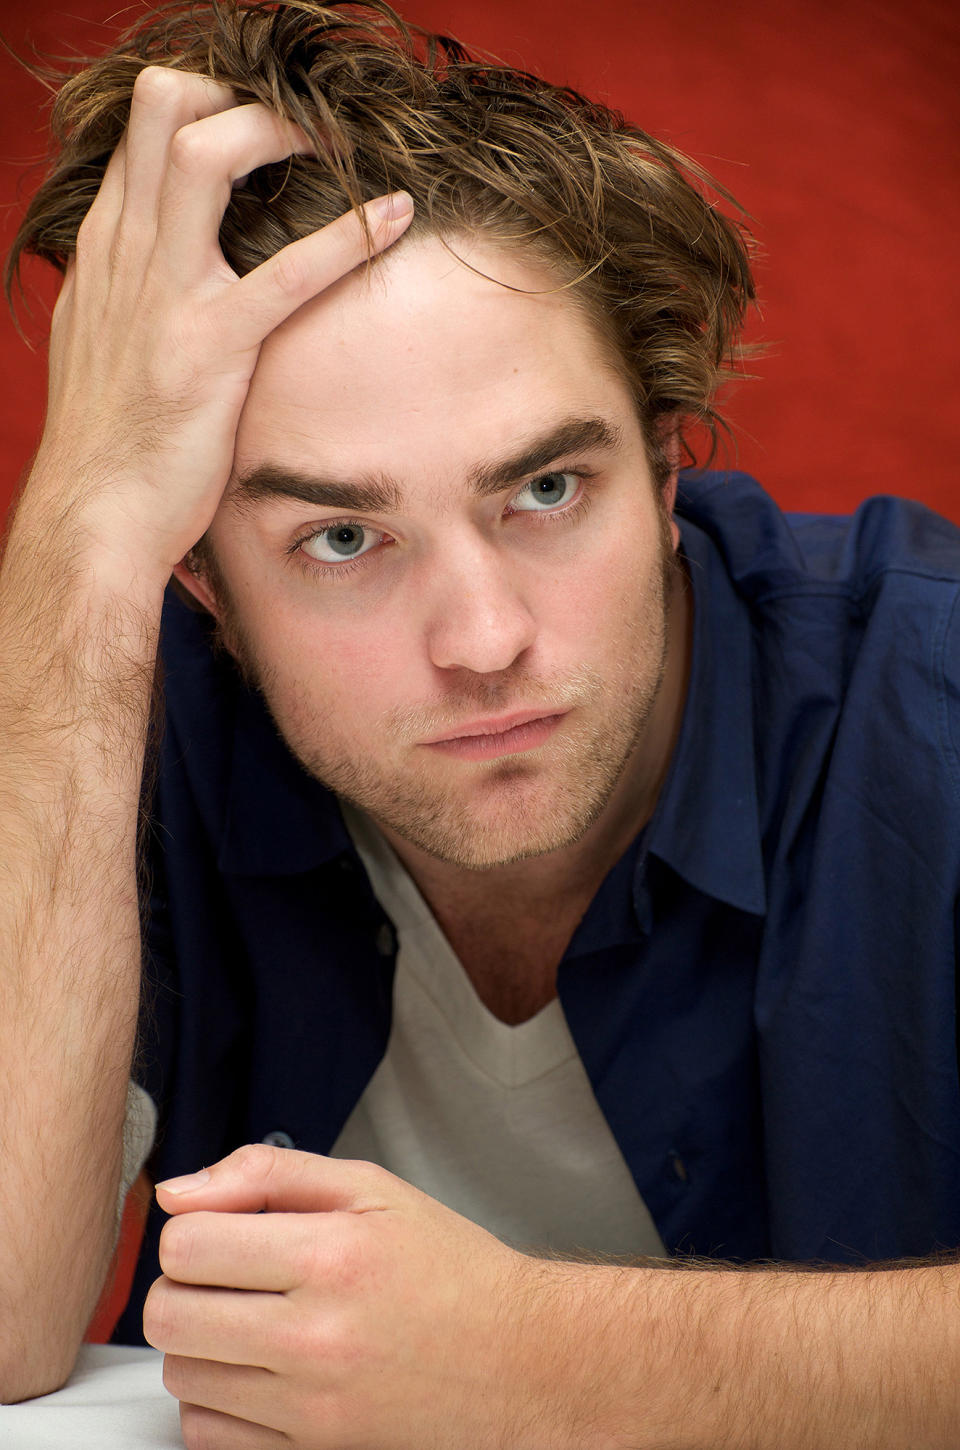 36 Photos of Robert Pattinson's Hair in Honor of His 36th Birthday